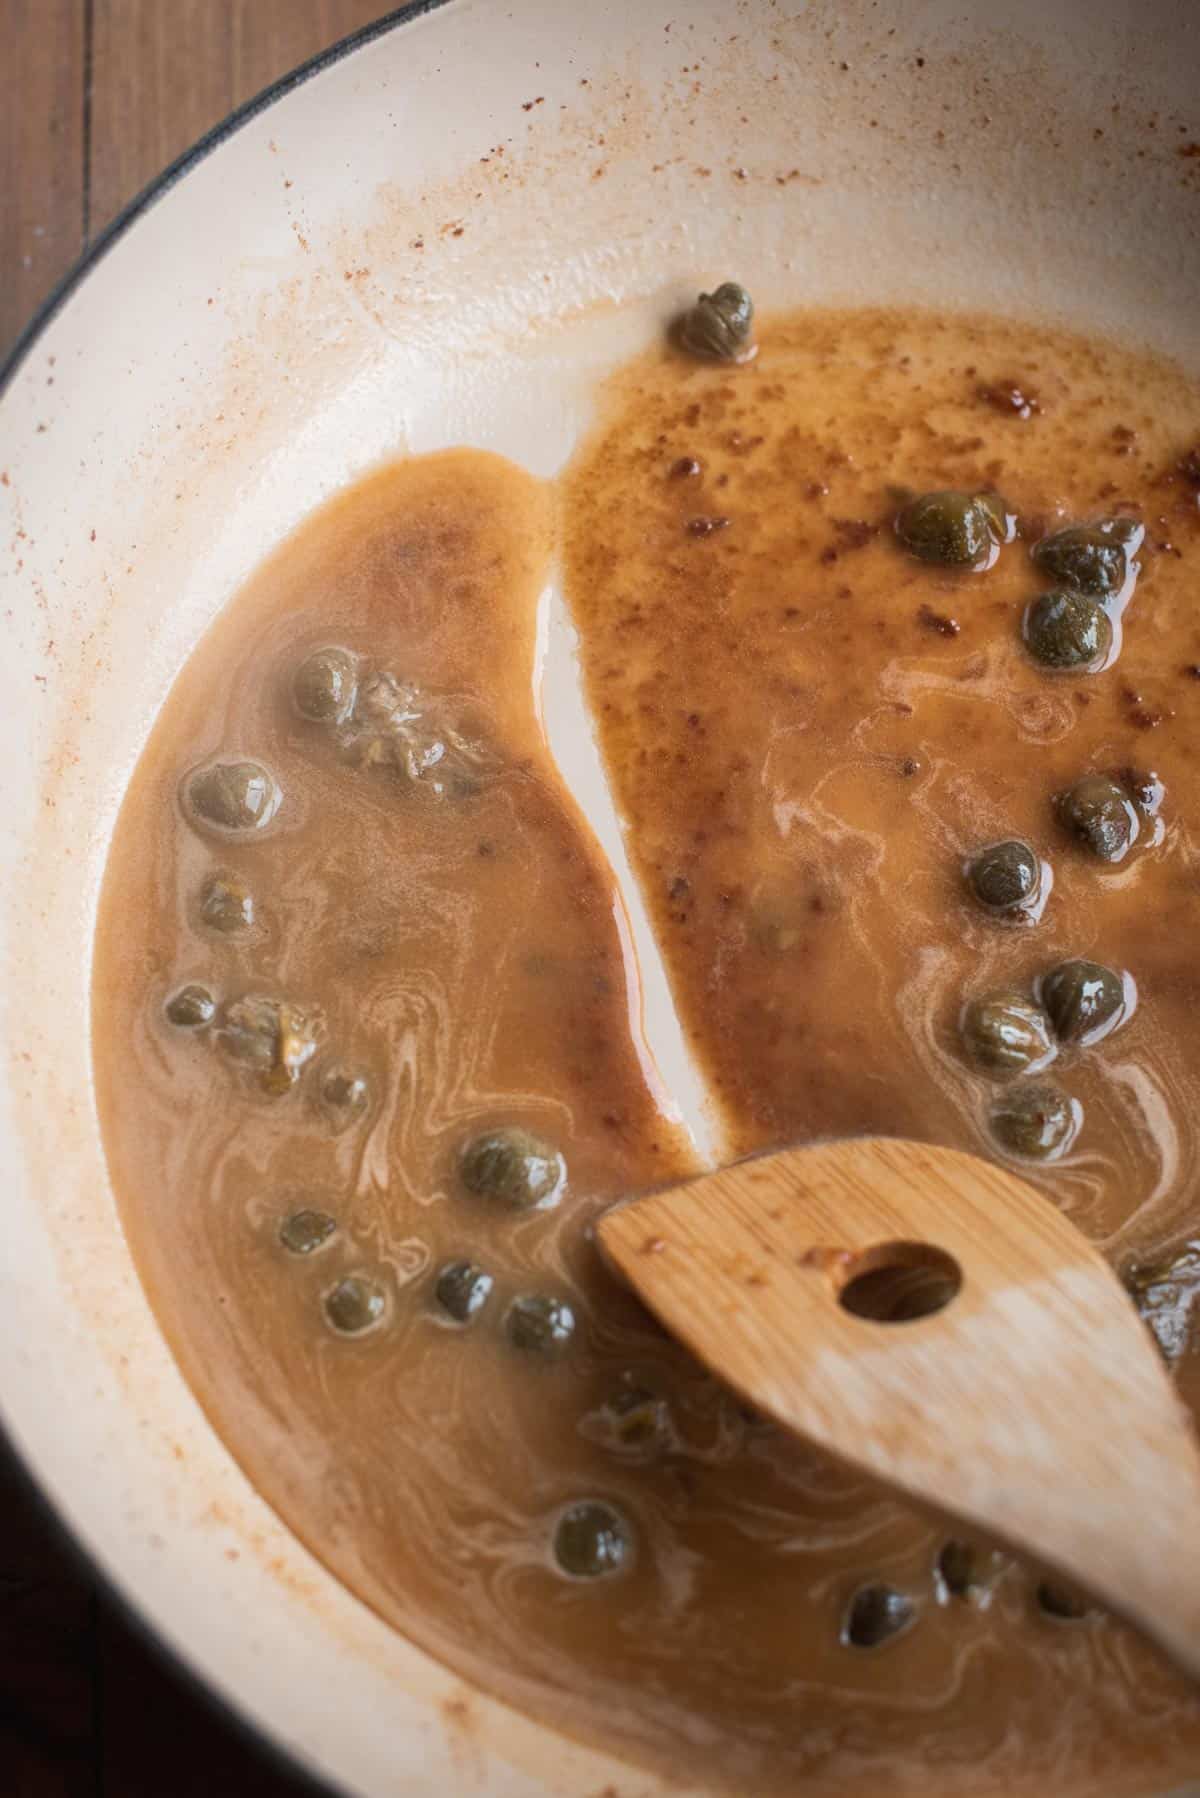 A sauce is made in a large white saucepan, a wooden spoon is being used to stir all the ingredients together and scrape and tasty drippings of the bottom of the pan.